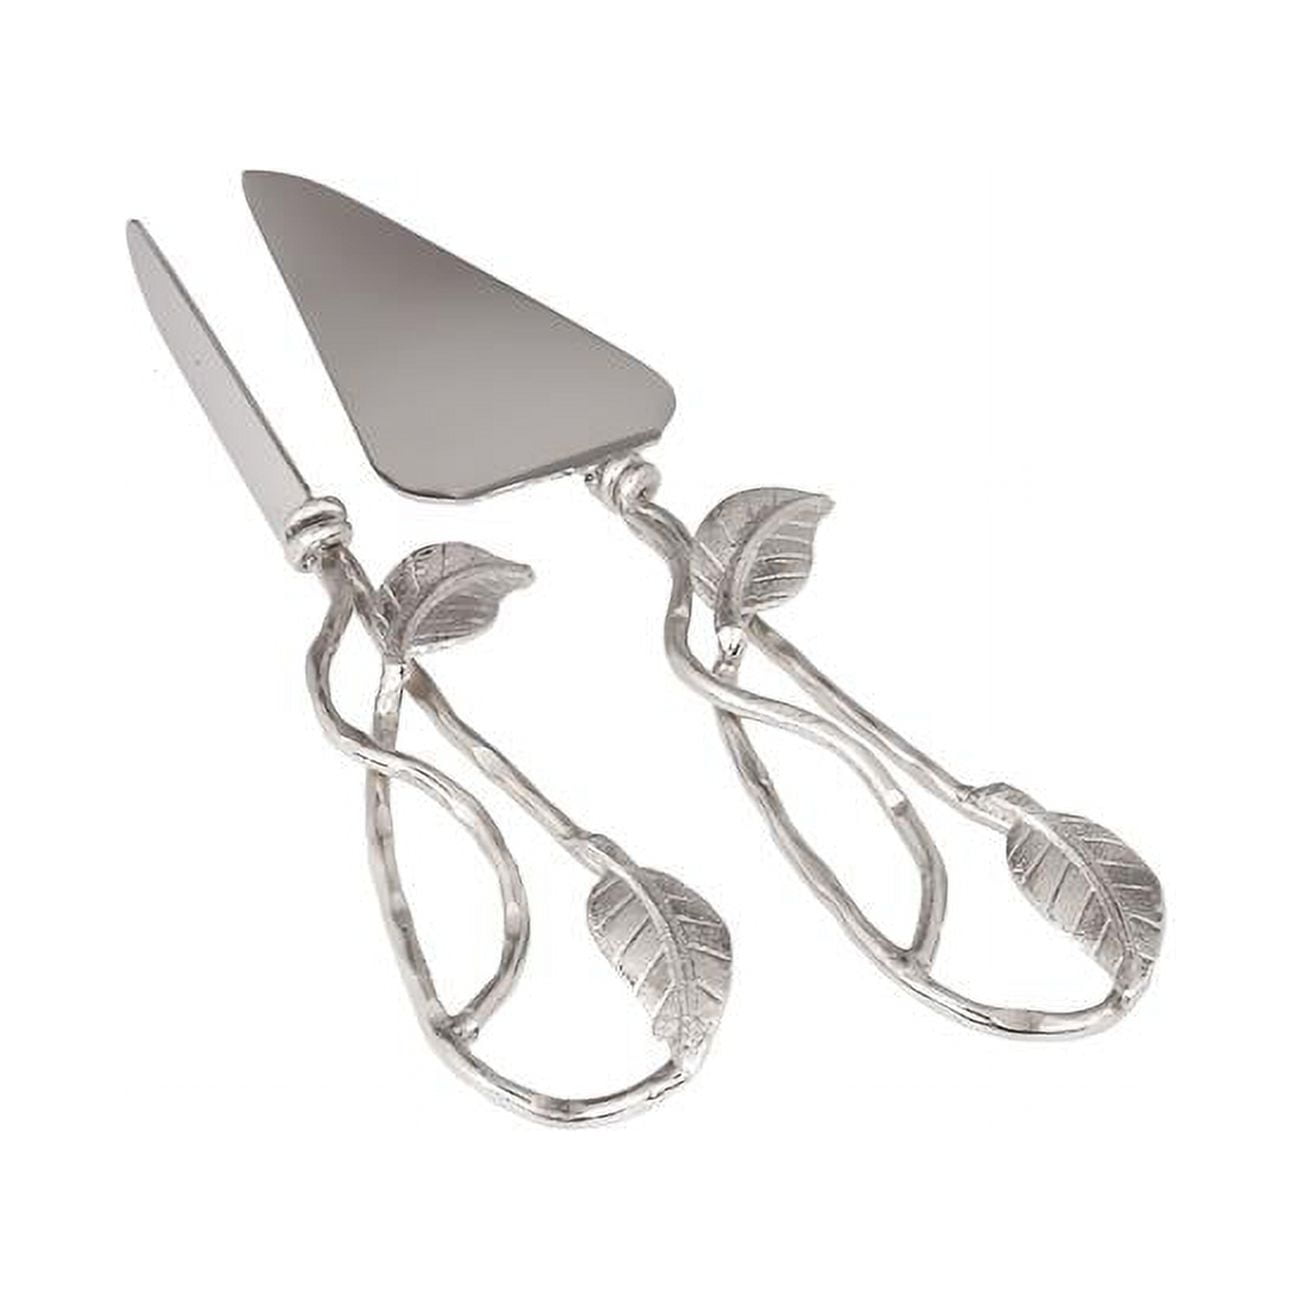 Picture of Classic Touch CSL948 13.75 in. Nickel Cake Servers with Leaf Design, Set of 2